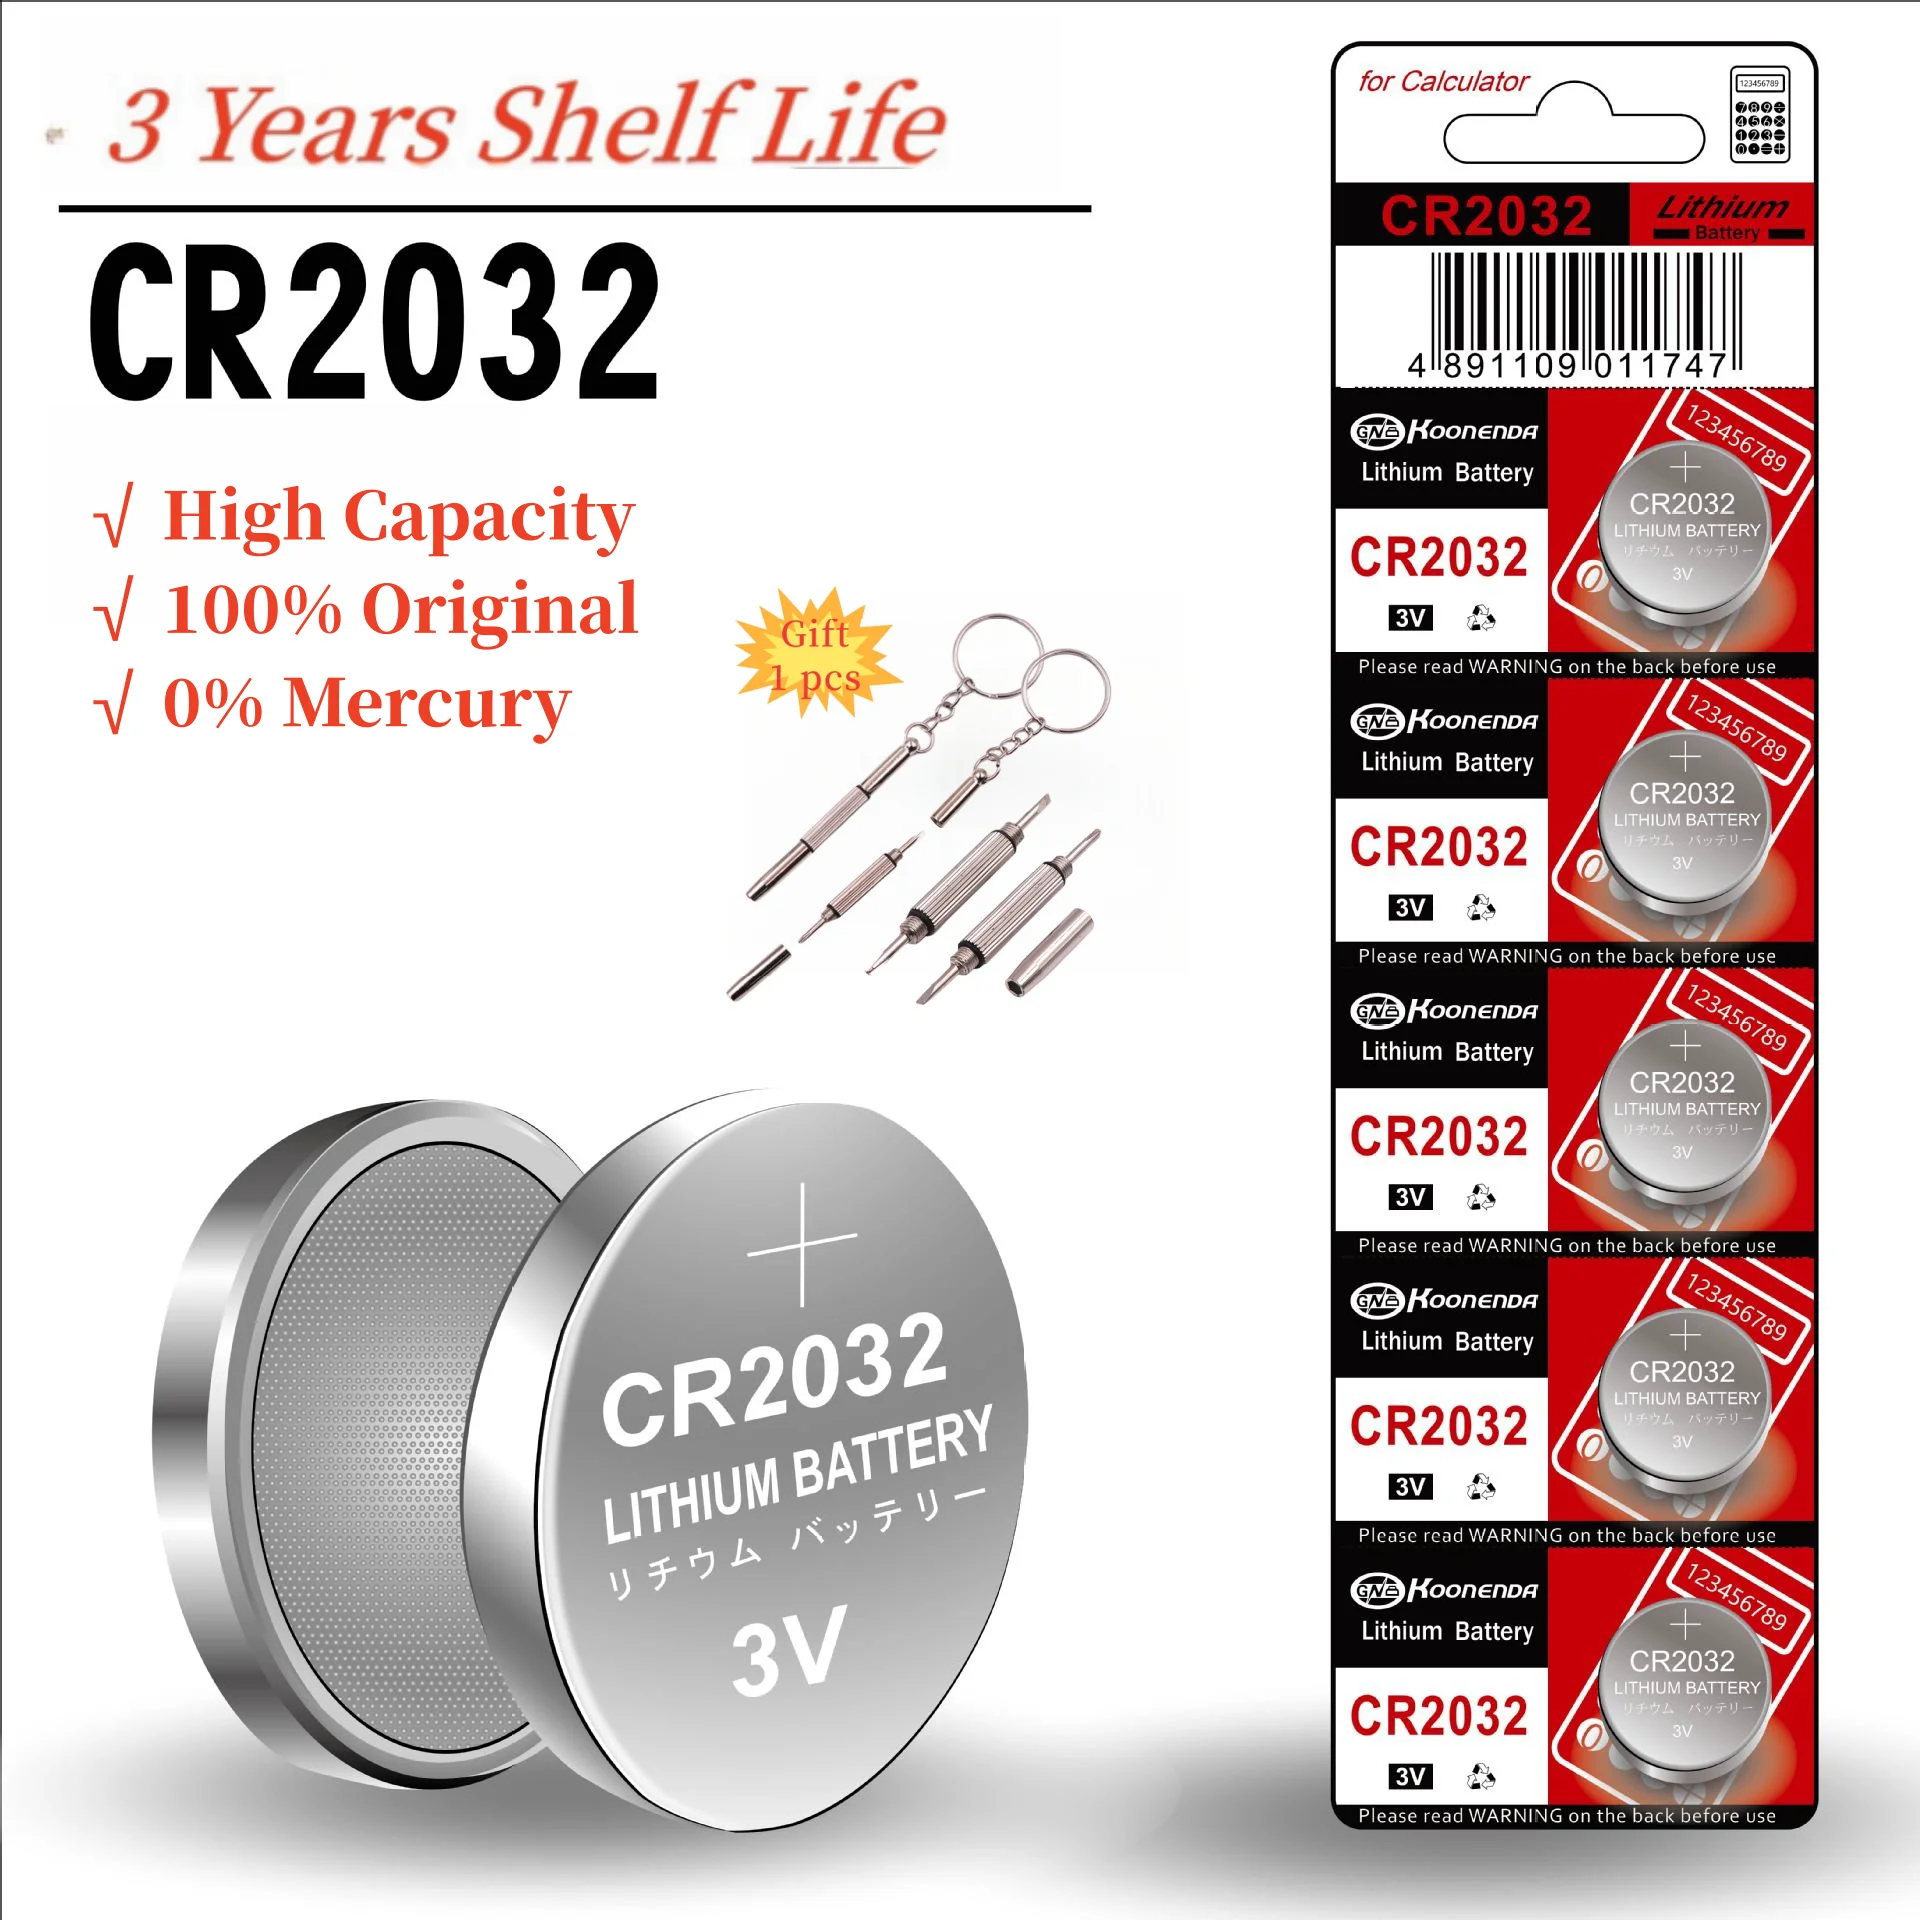 

New 10-50pcs CR2032 Batteries alkaline 3V non-rechargeable lithium button battery for Keyfobs Toys Medical devices Calculators